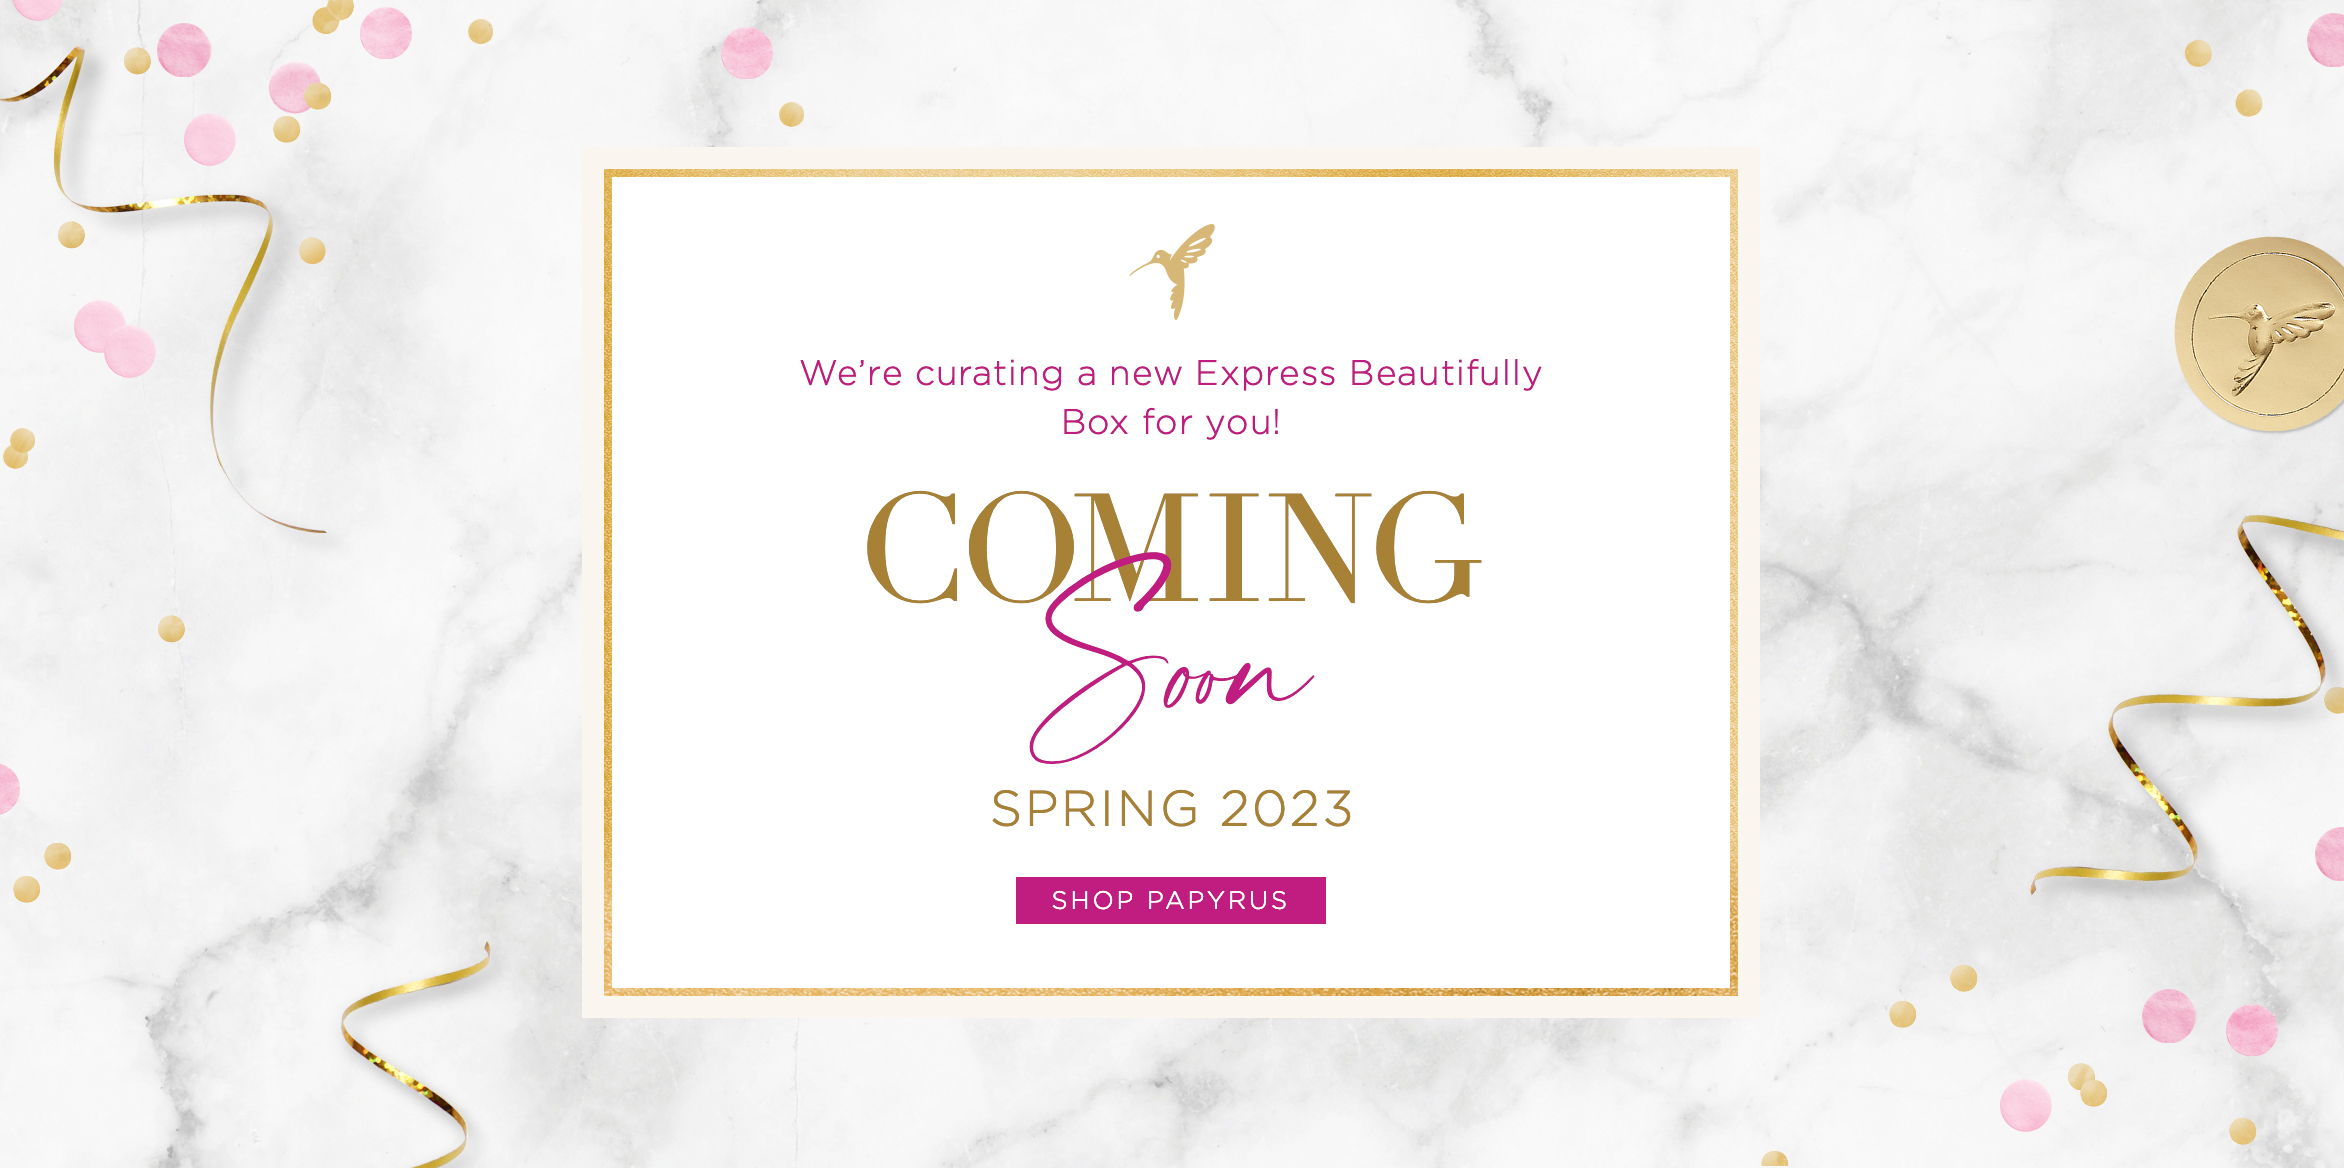 We're curating a new Express Beautifully Box for you! Coming soon Spring 2023.